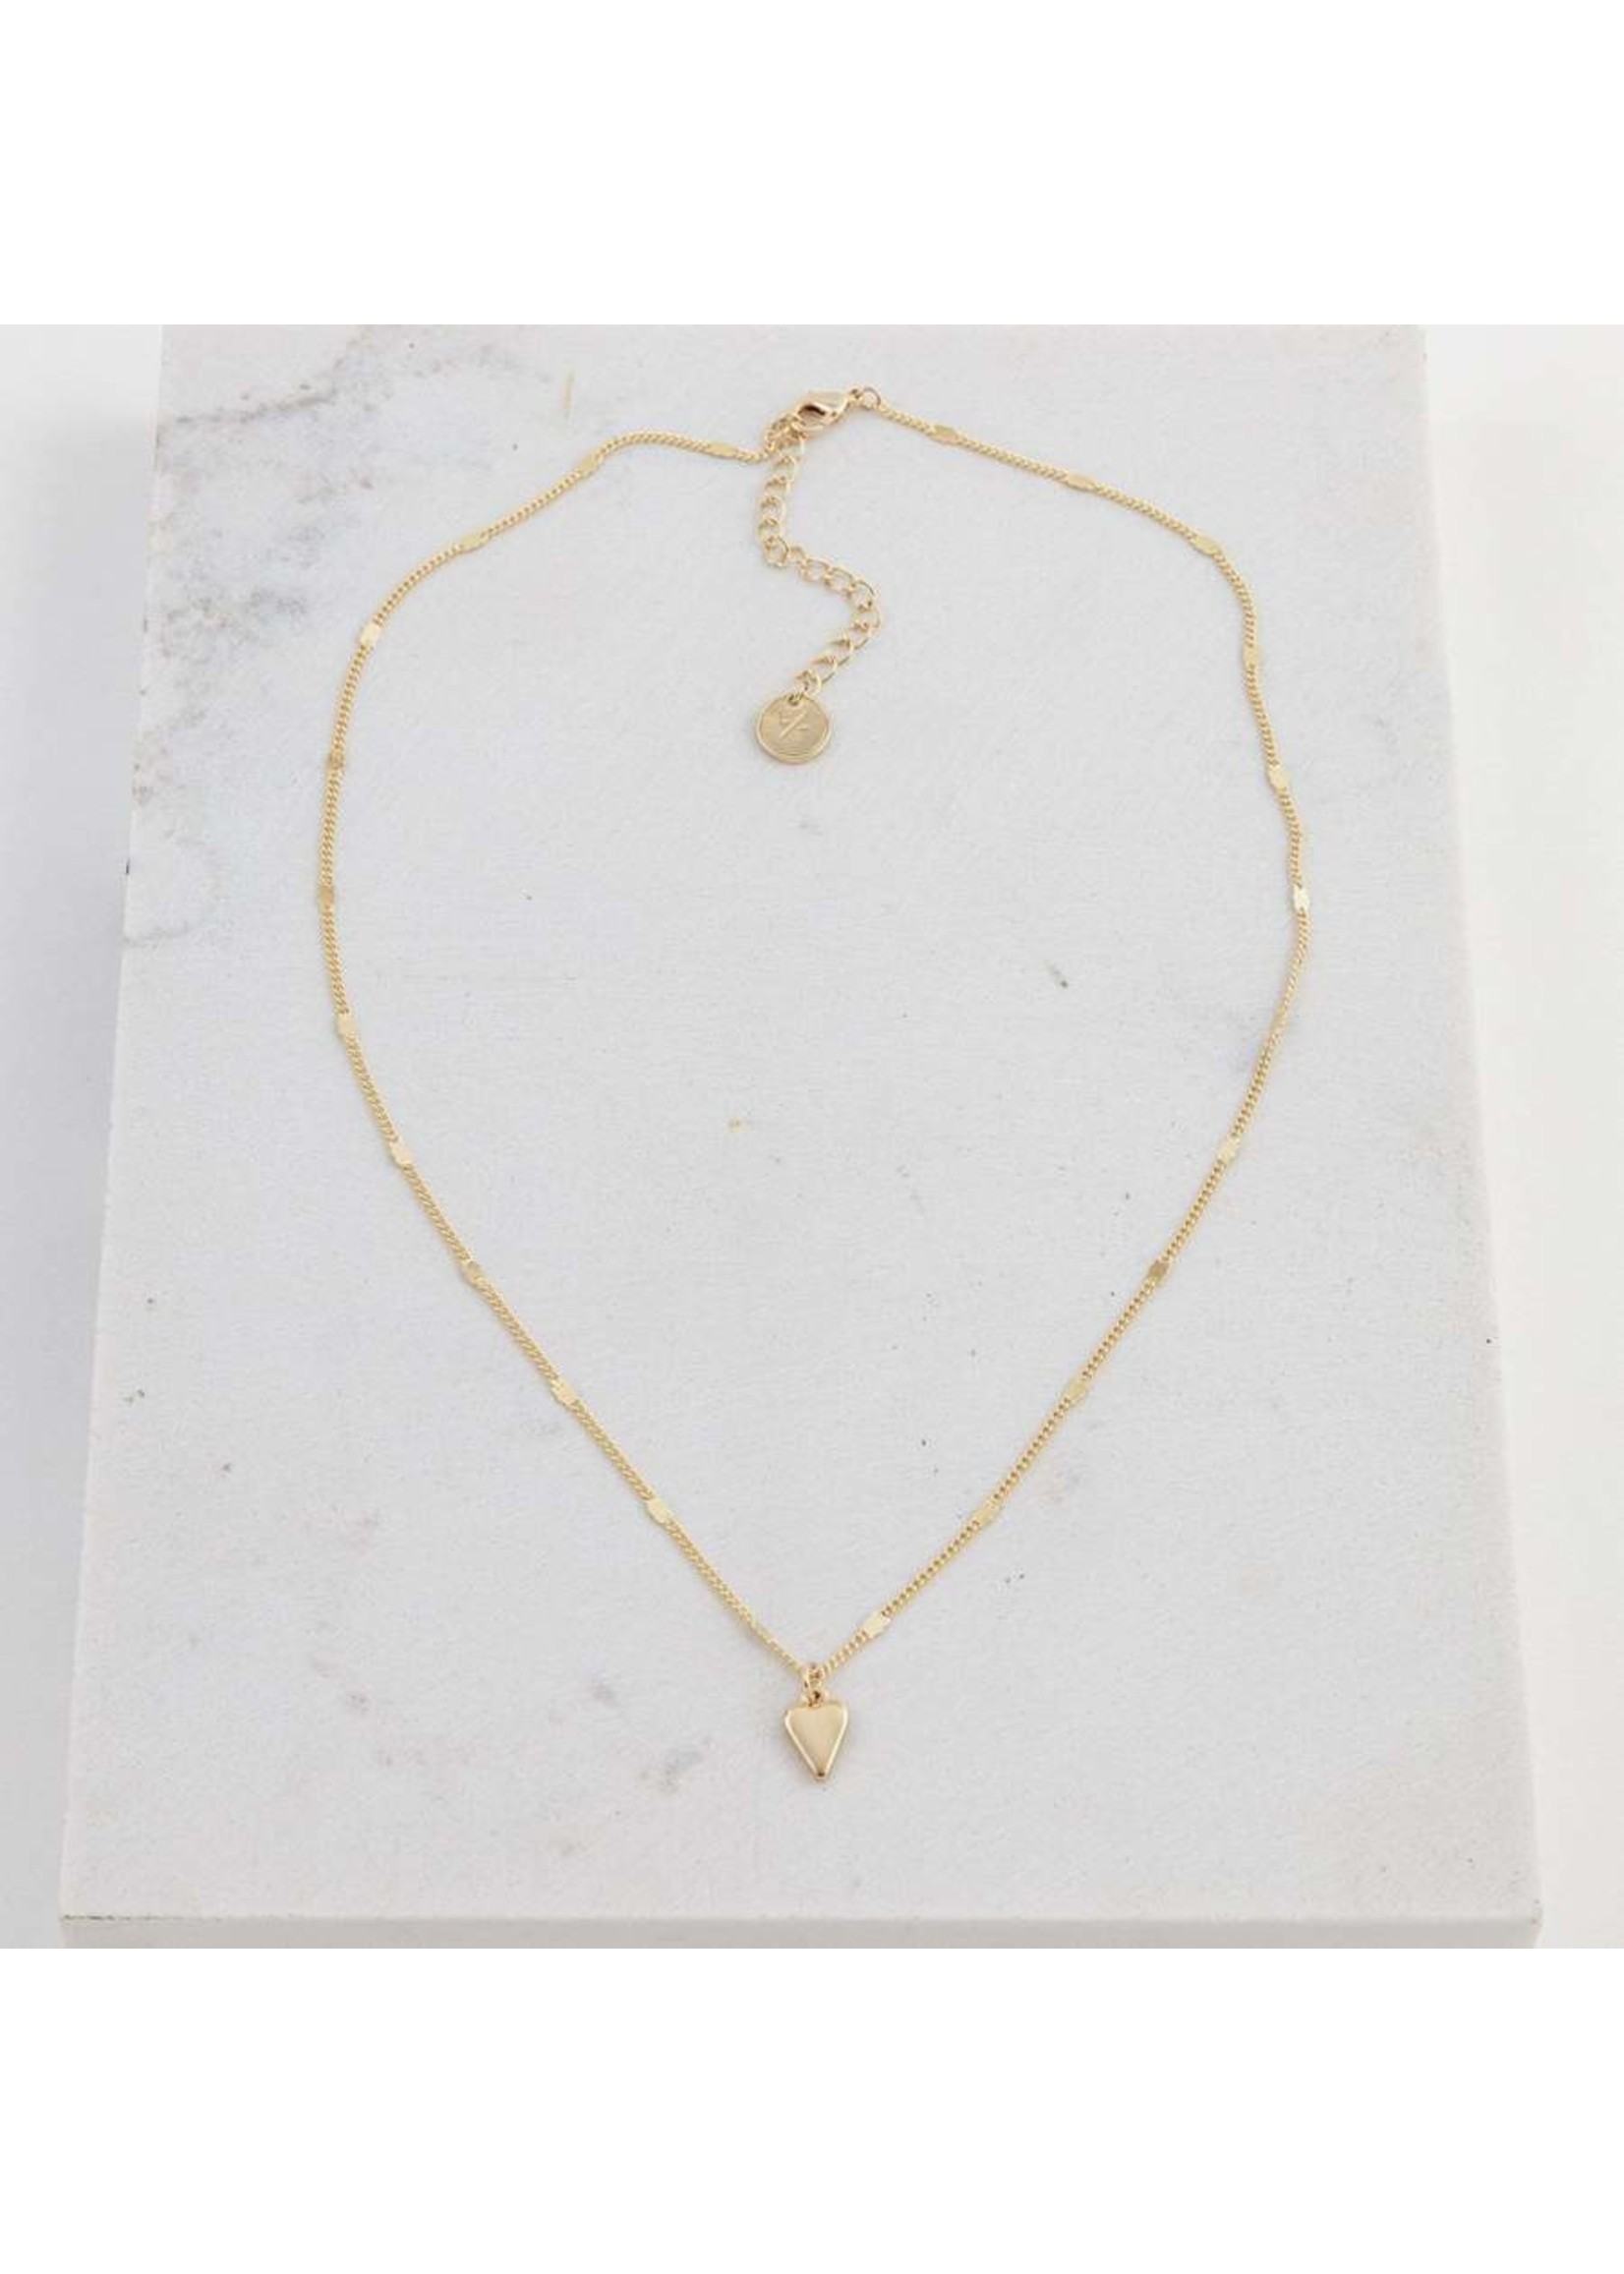 LOVER'S TEMPO EVERLY HEART NECKLACE- GOLD